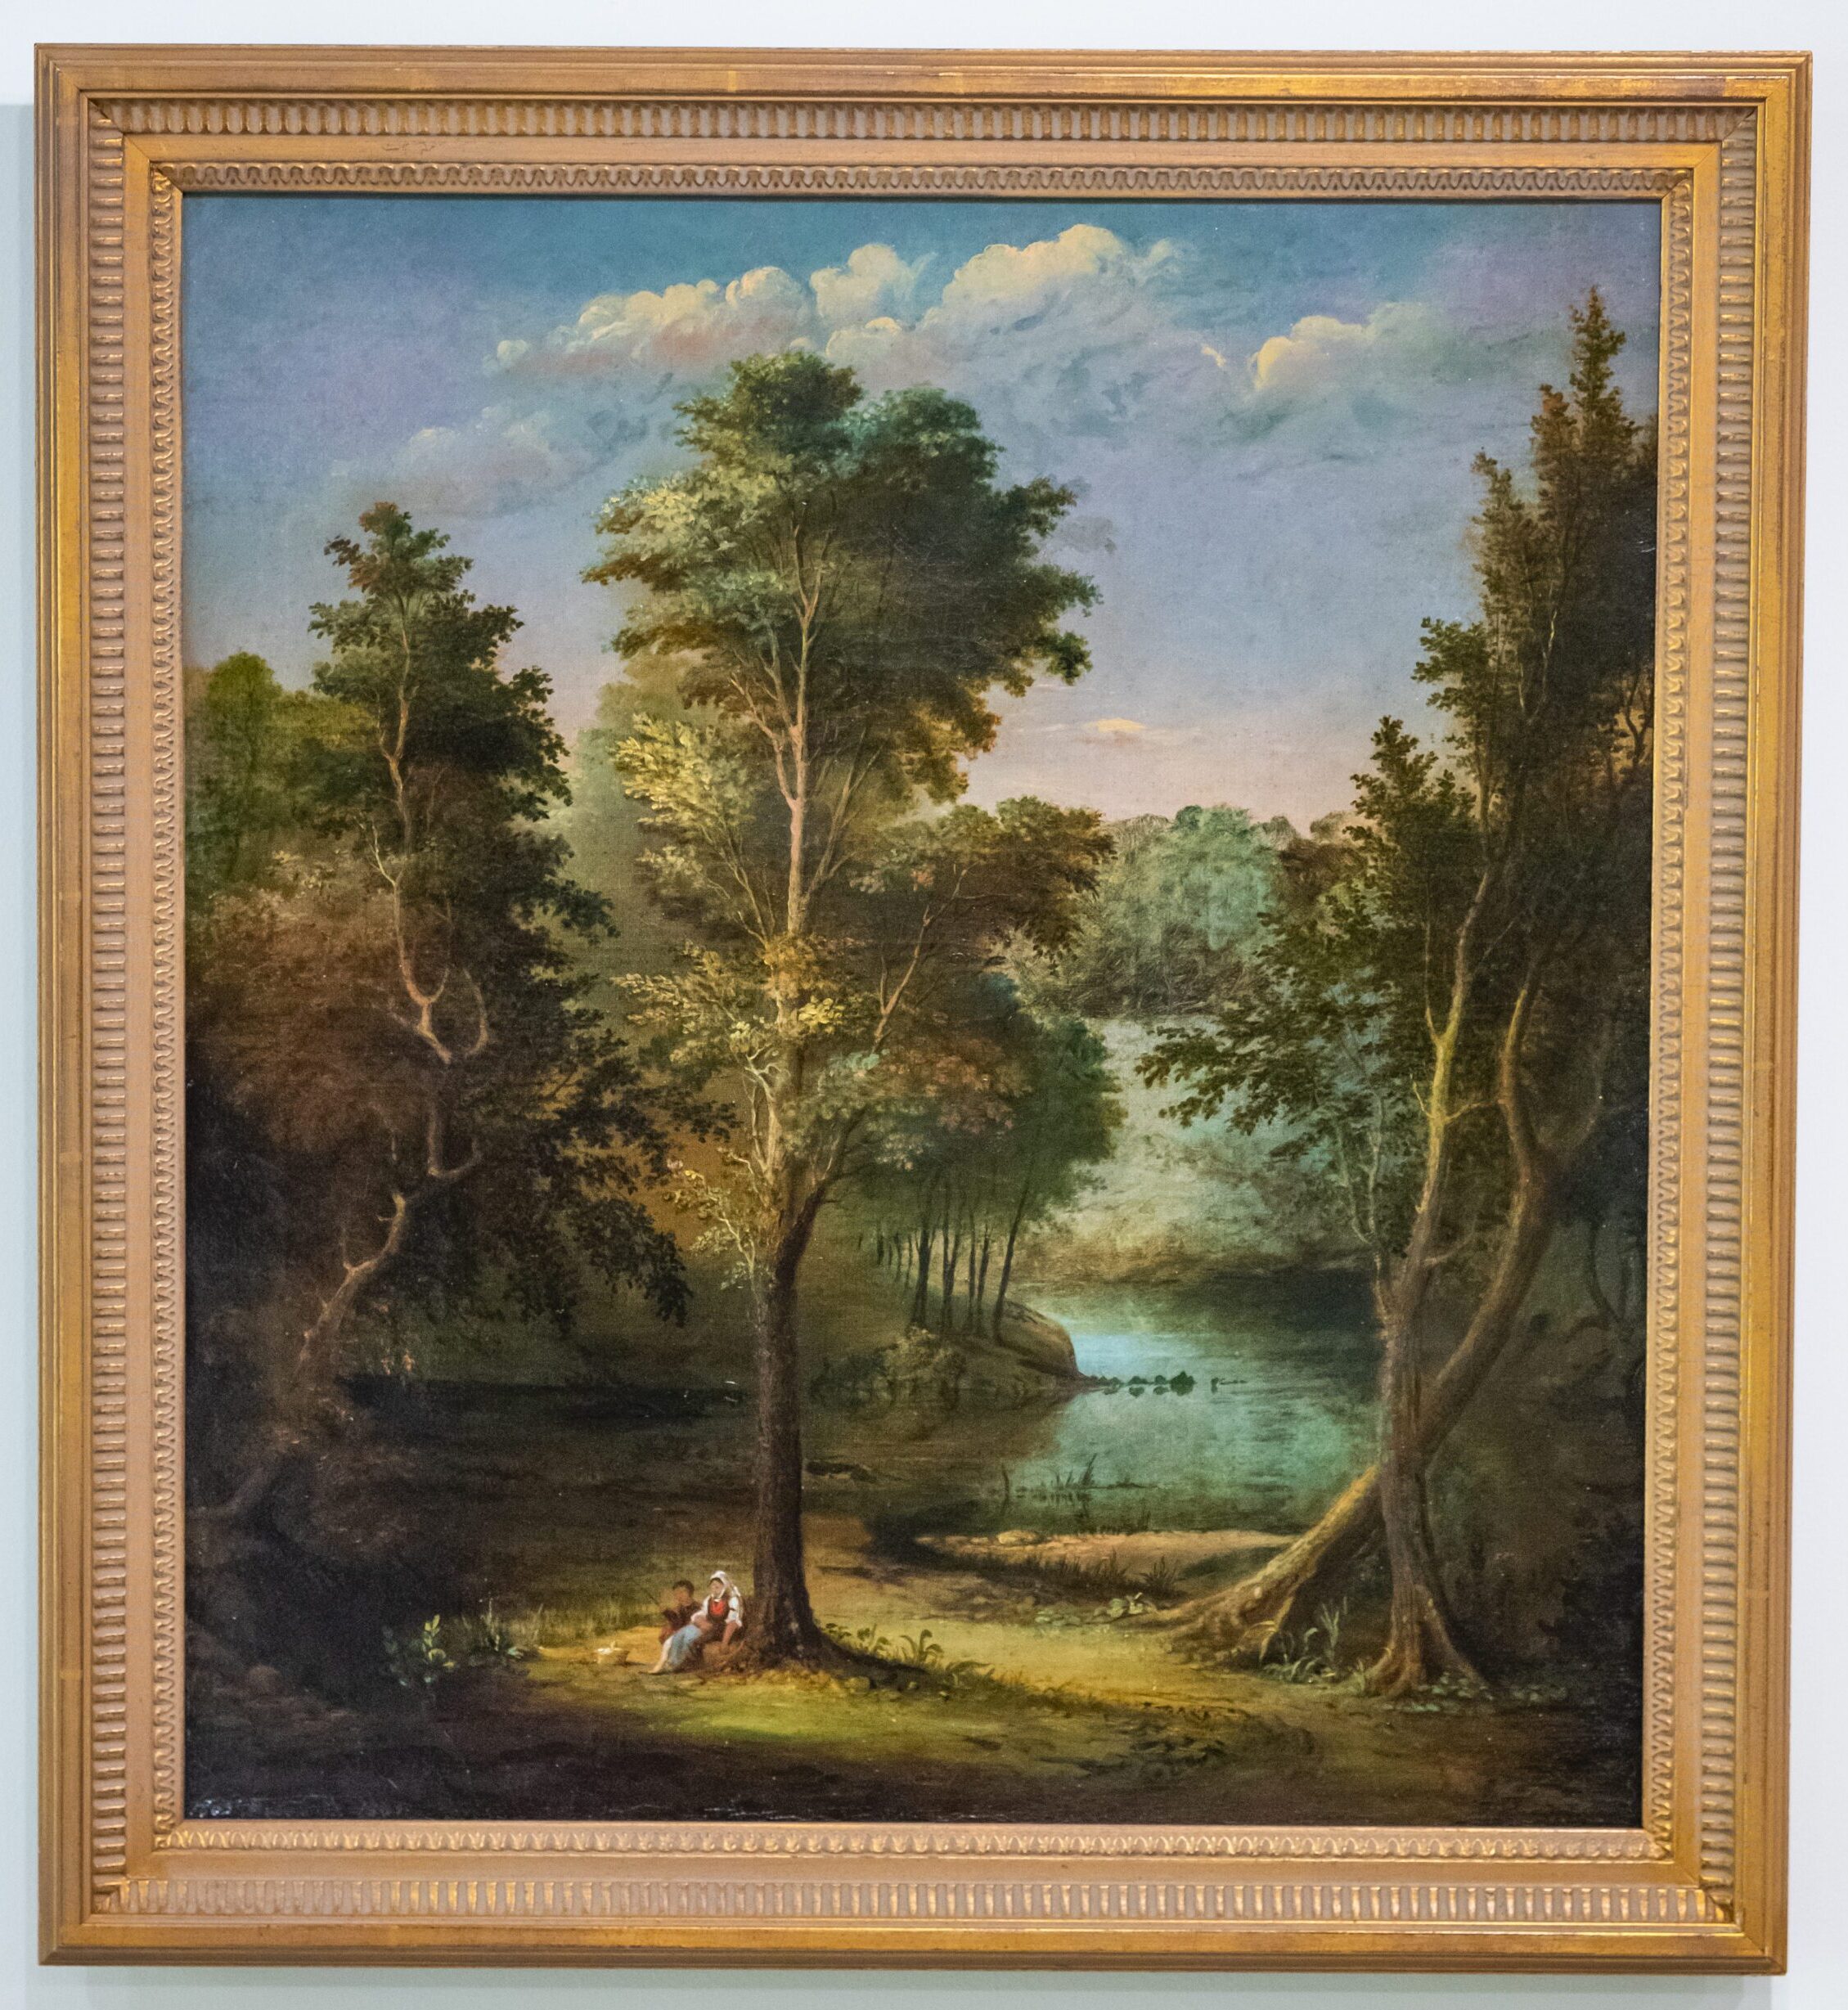 Framed painting of a landscapr with tall trees int he foreground and water in the background